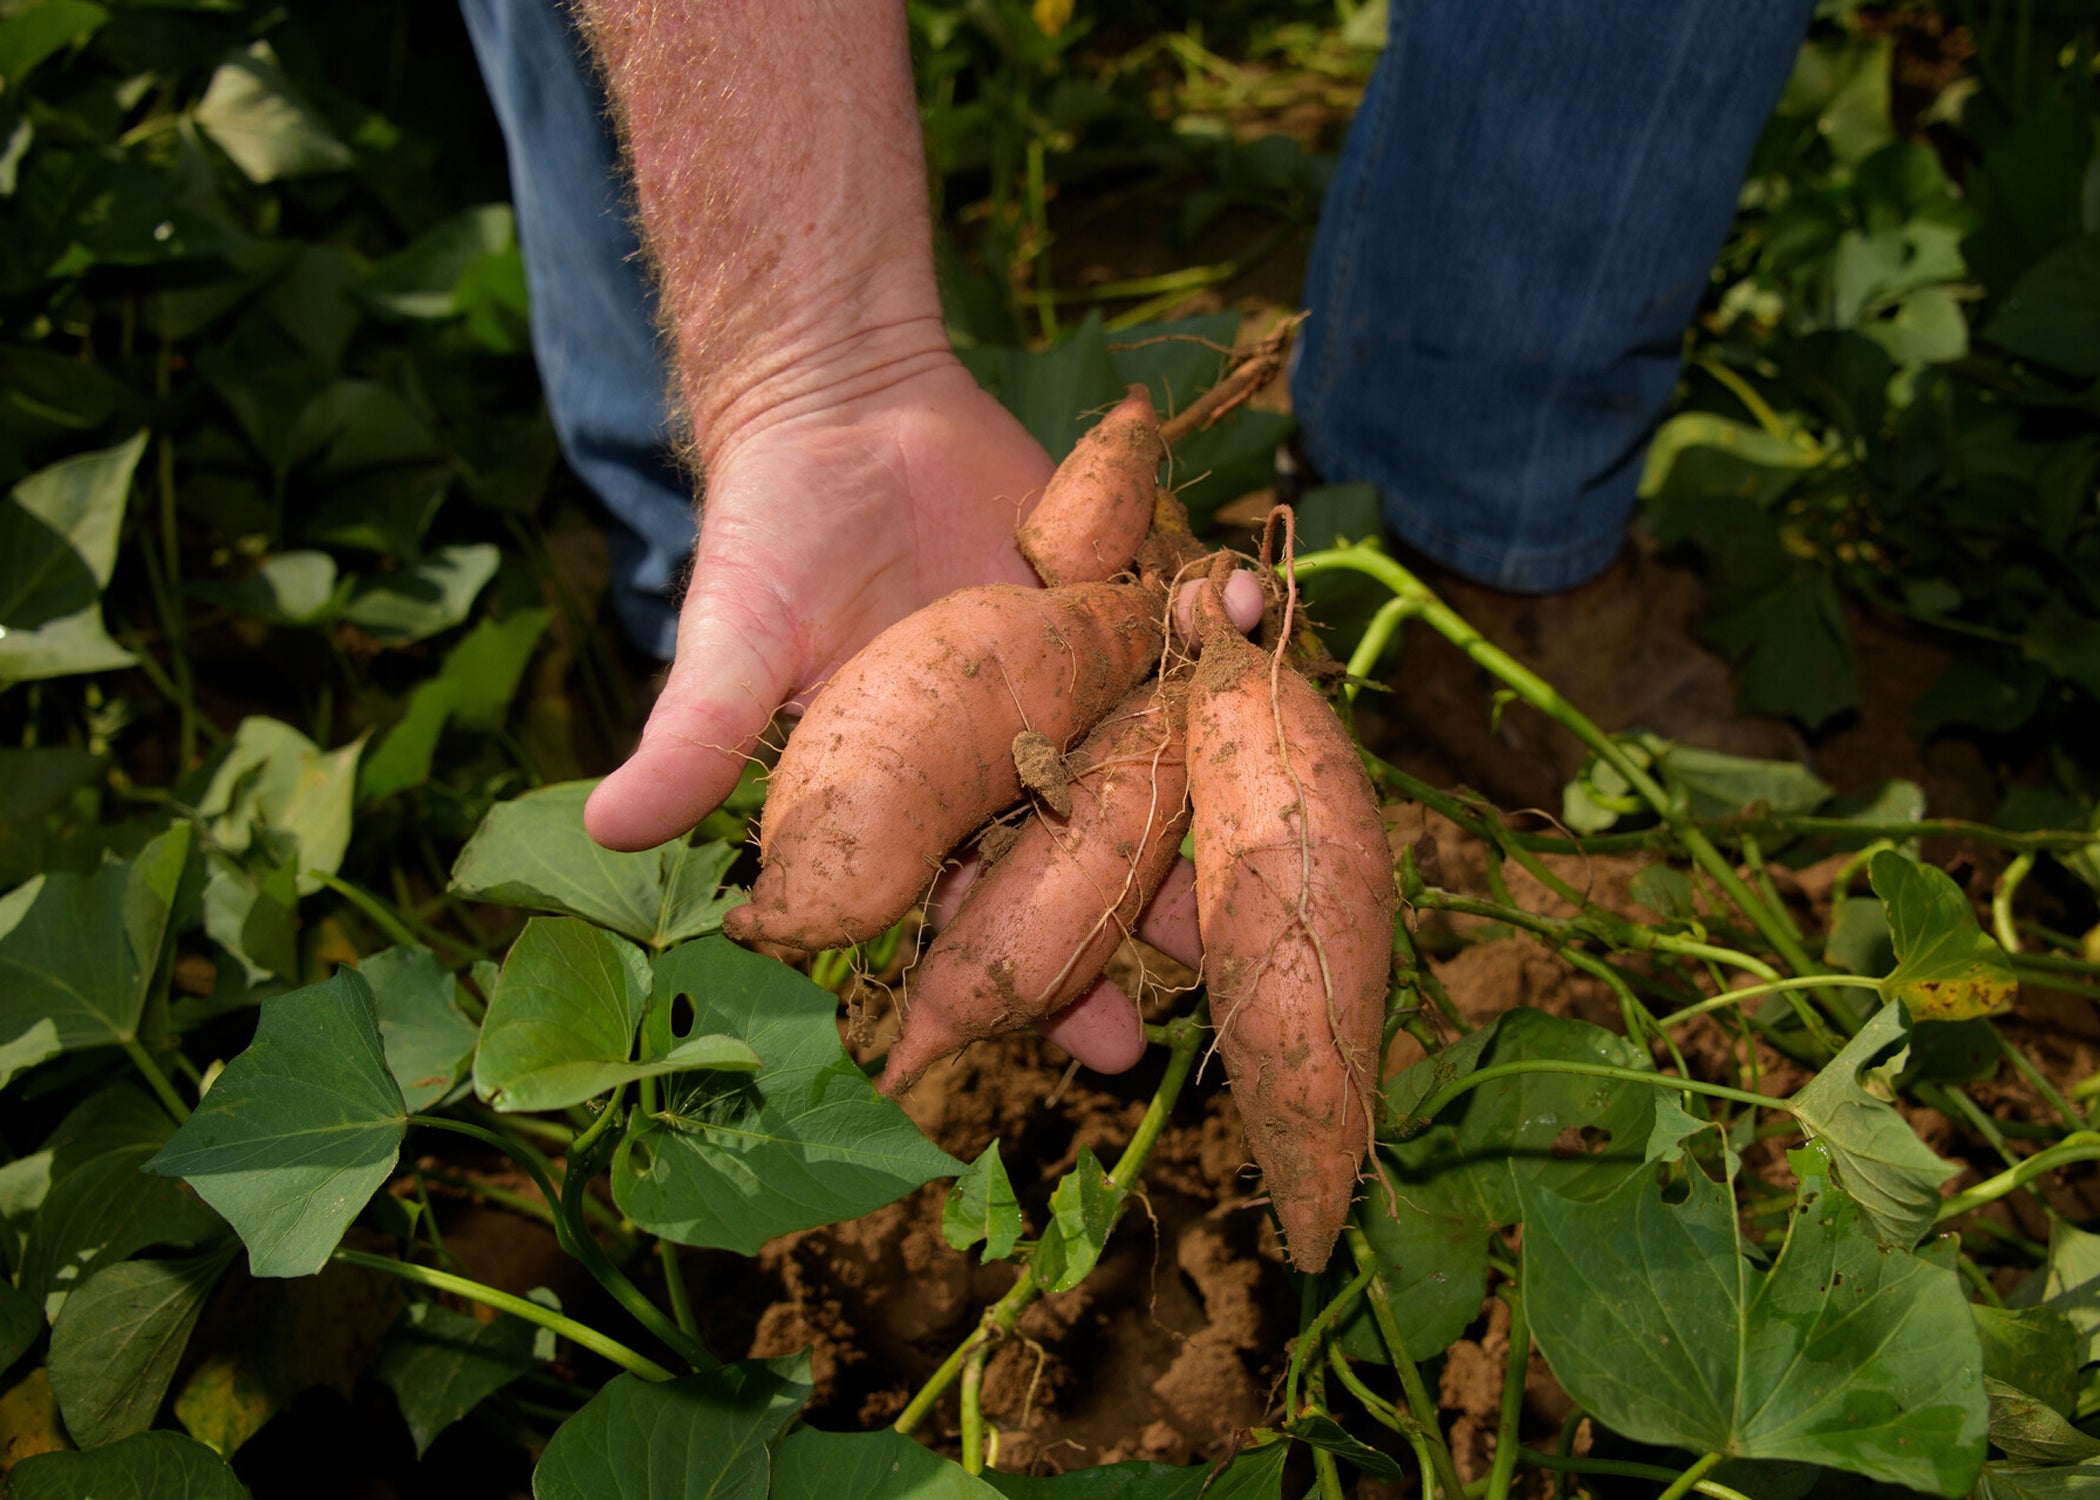 A hand holds sweet potatoes just lifted from the ground.